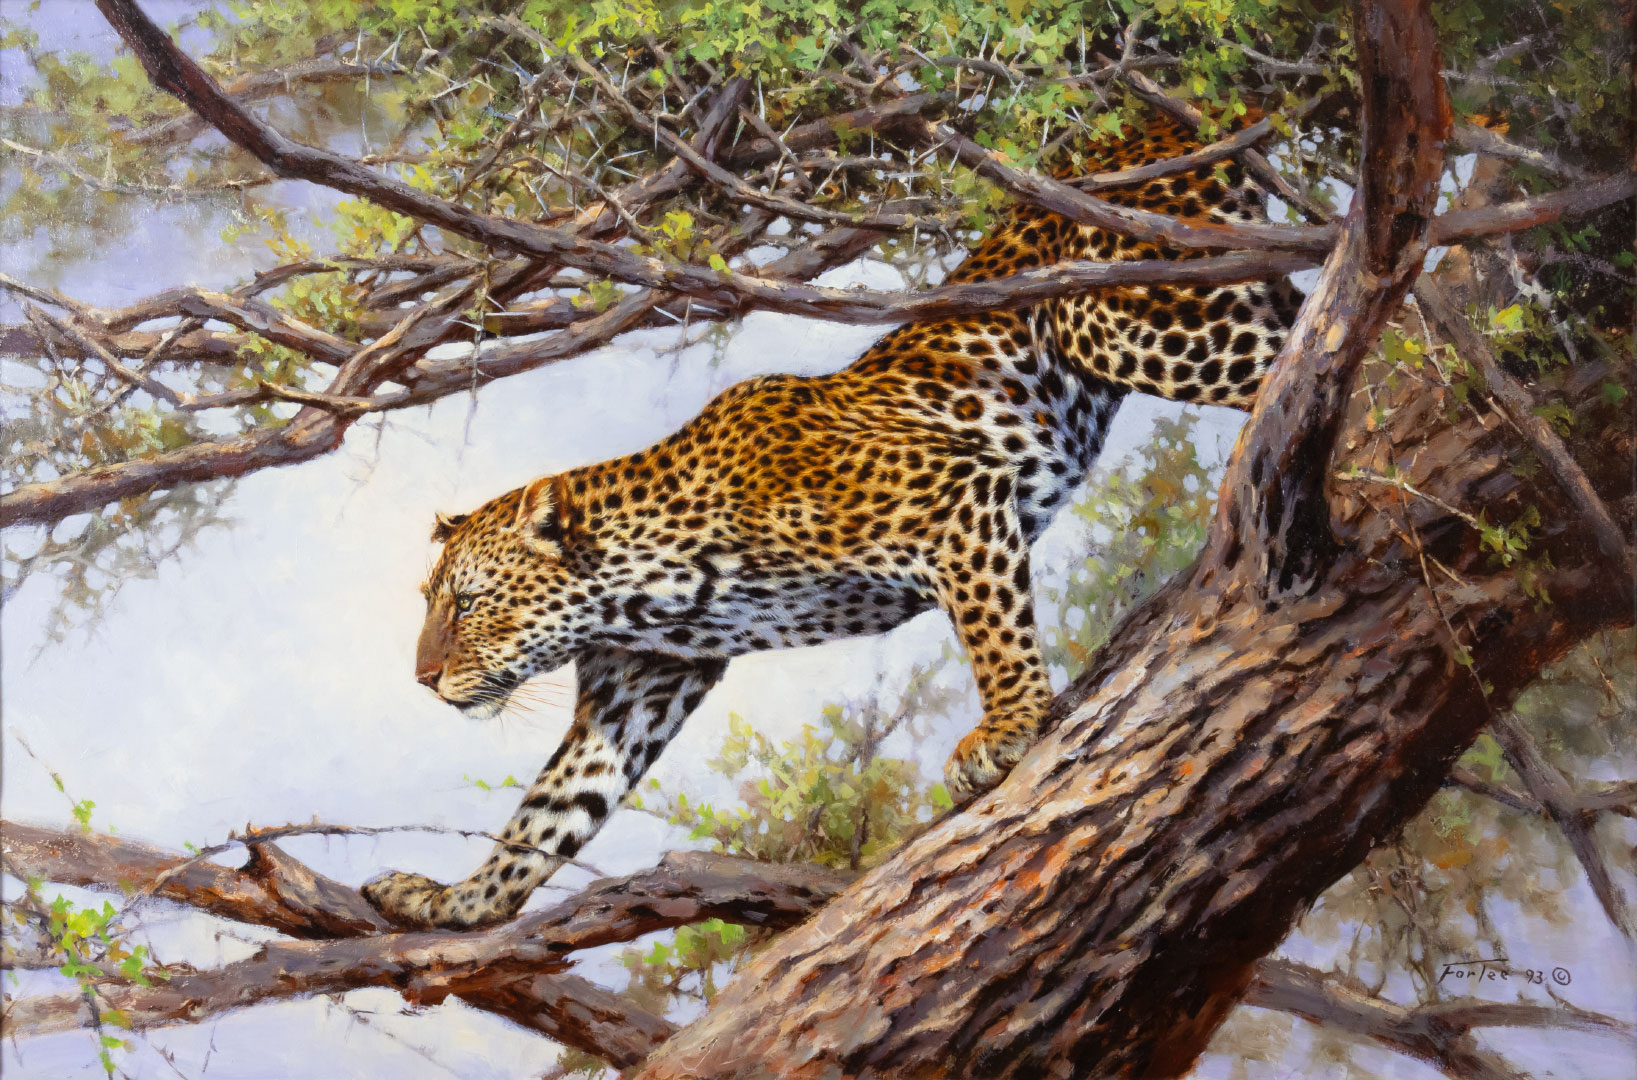 Eric Forlee, Leopard in an Acacia Tree, oil on canvas